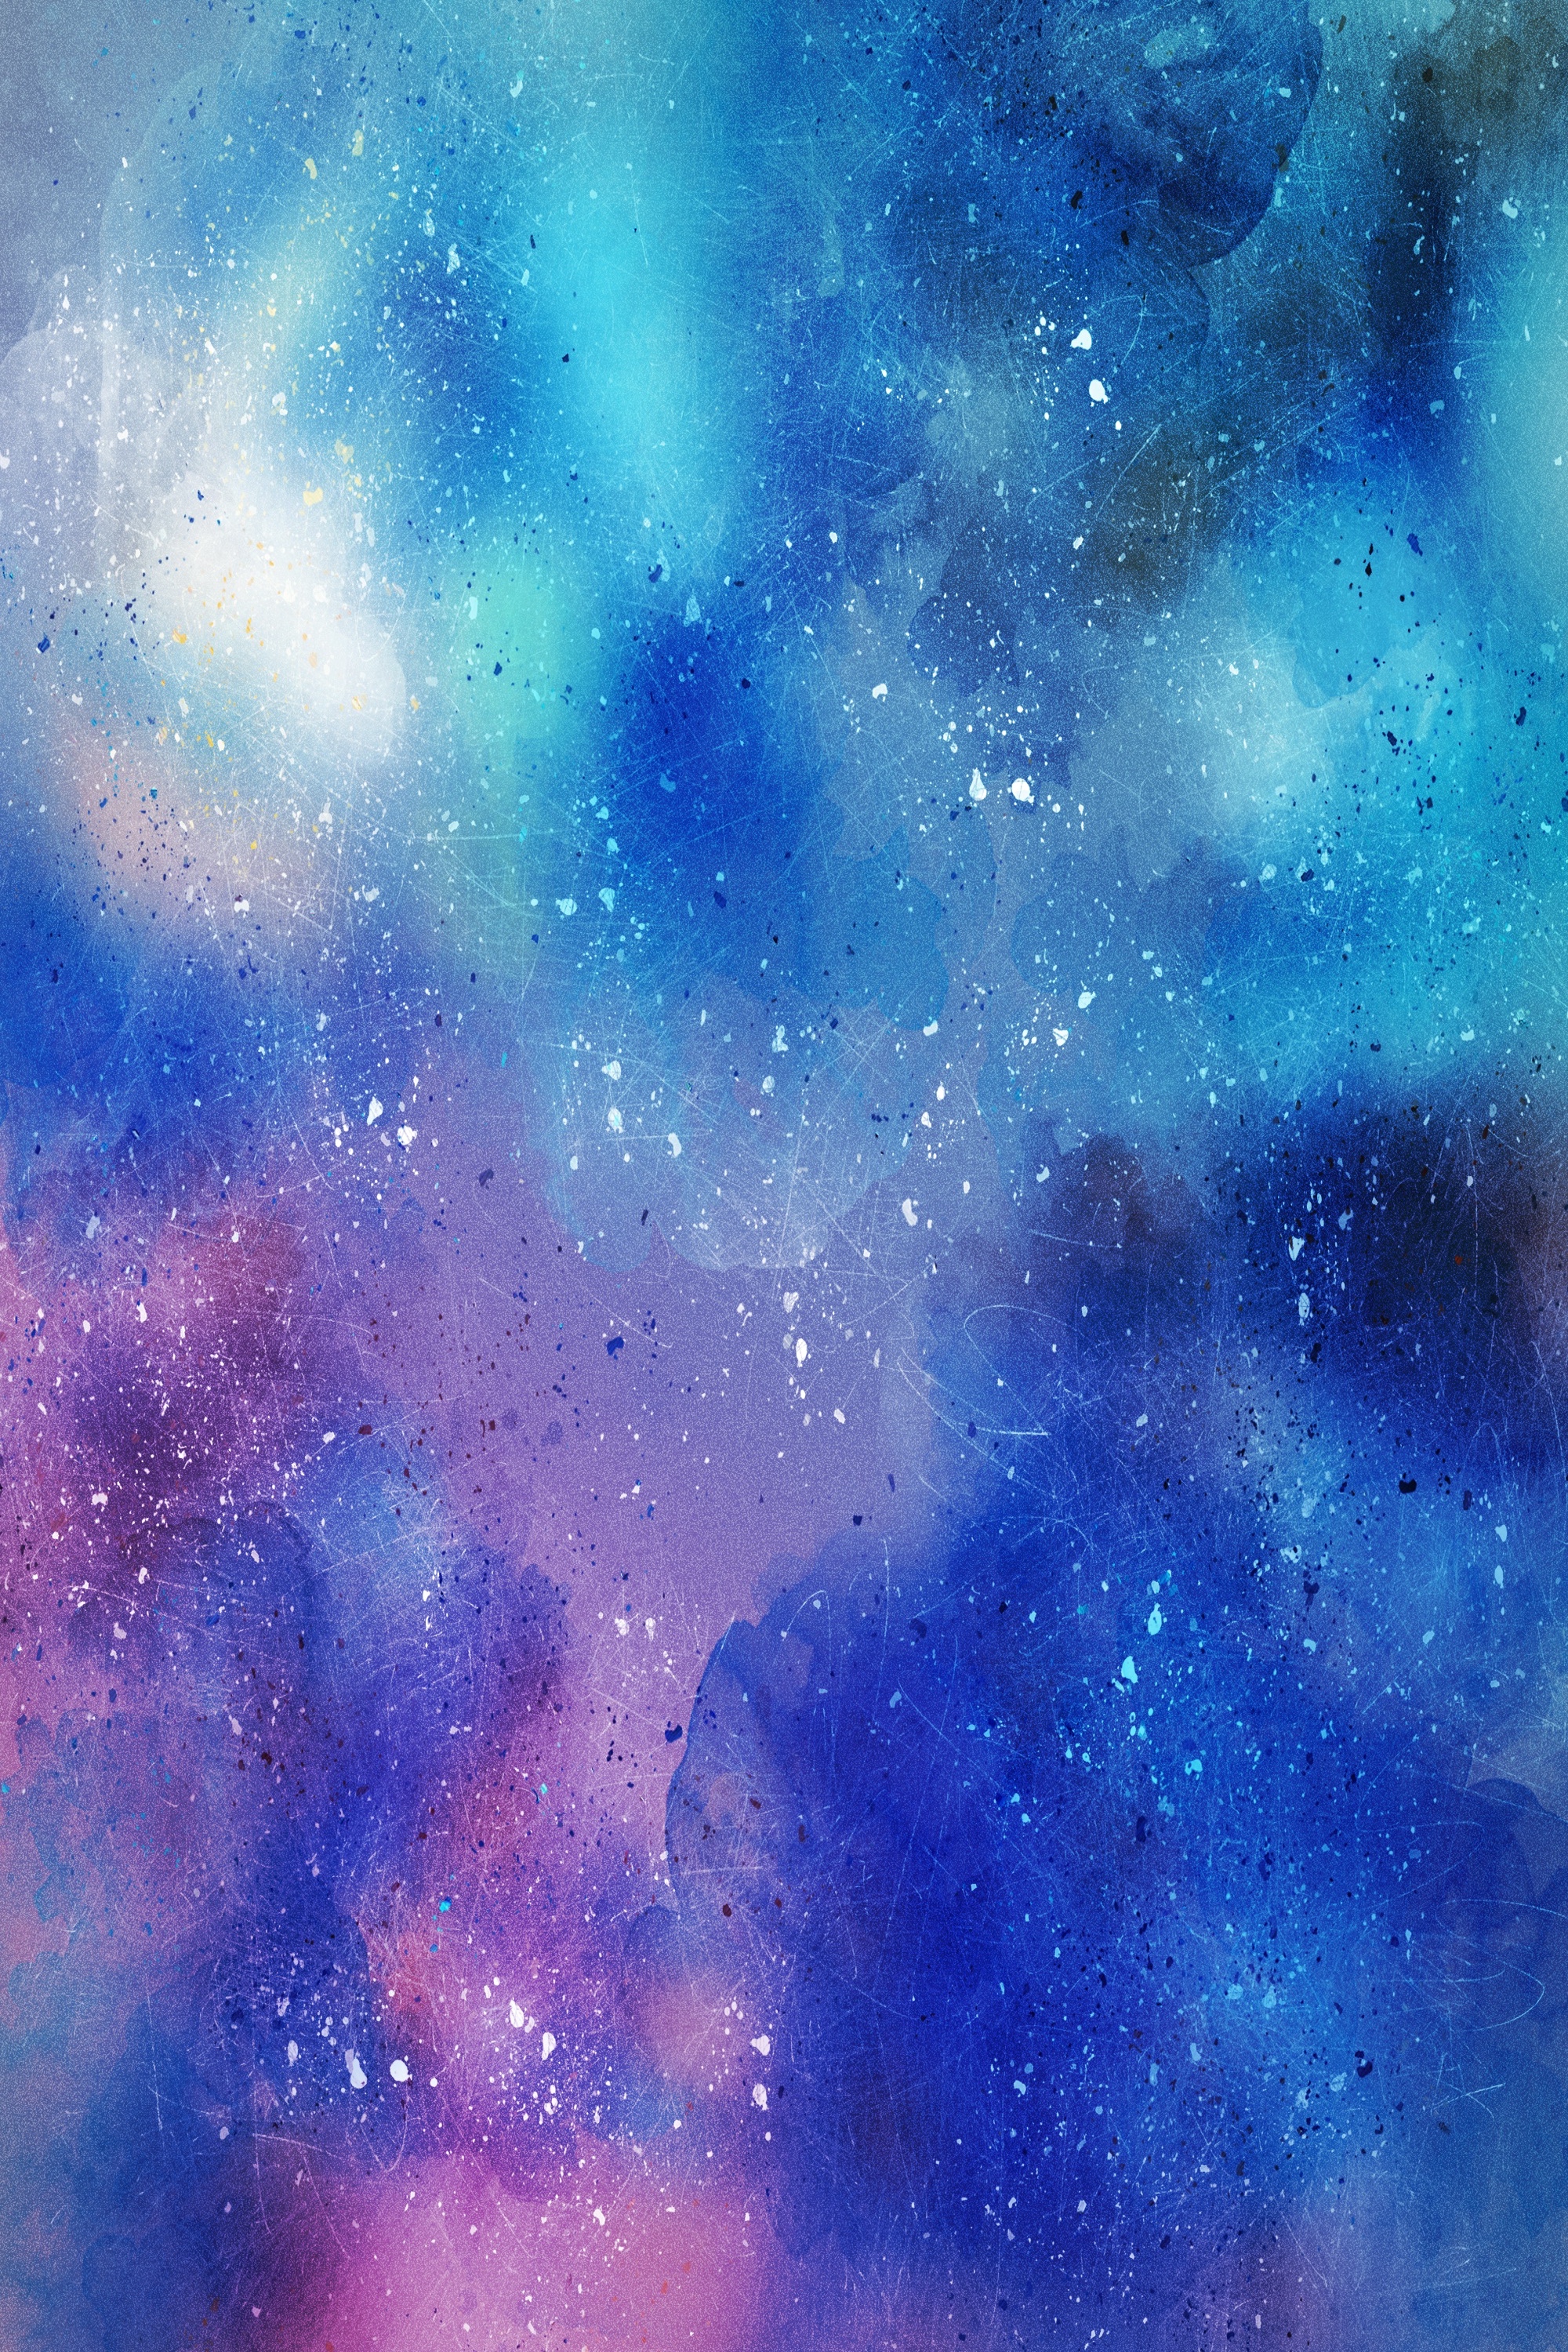 shades, scratches, texture, textures, paint, stains, spots, mixing iphone wallpaper